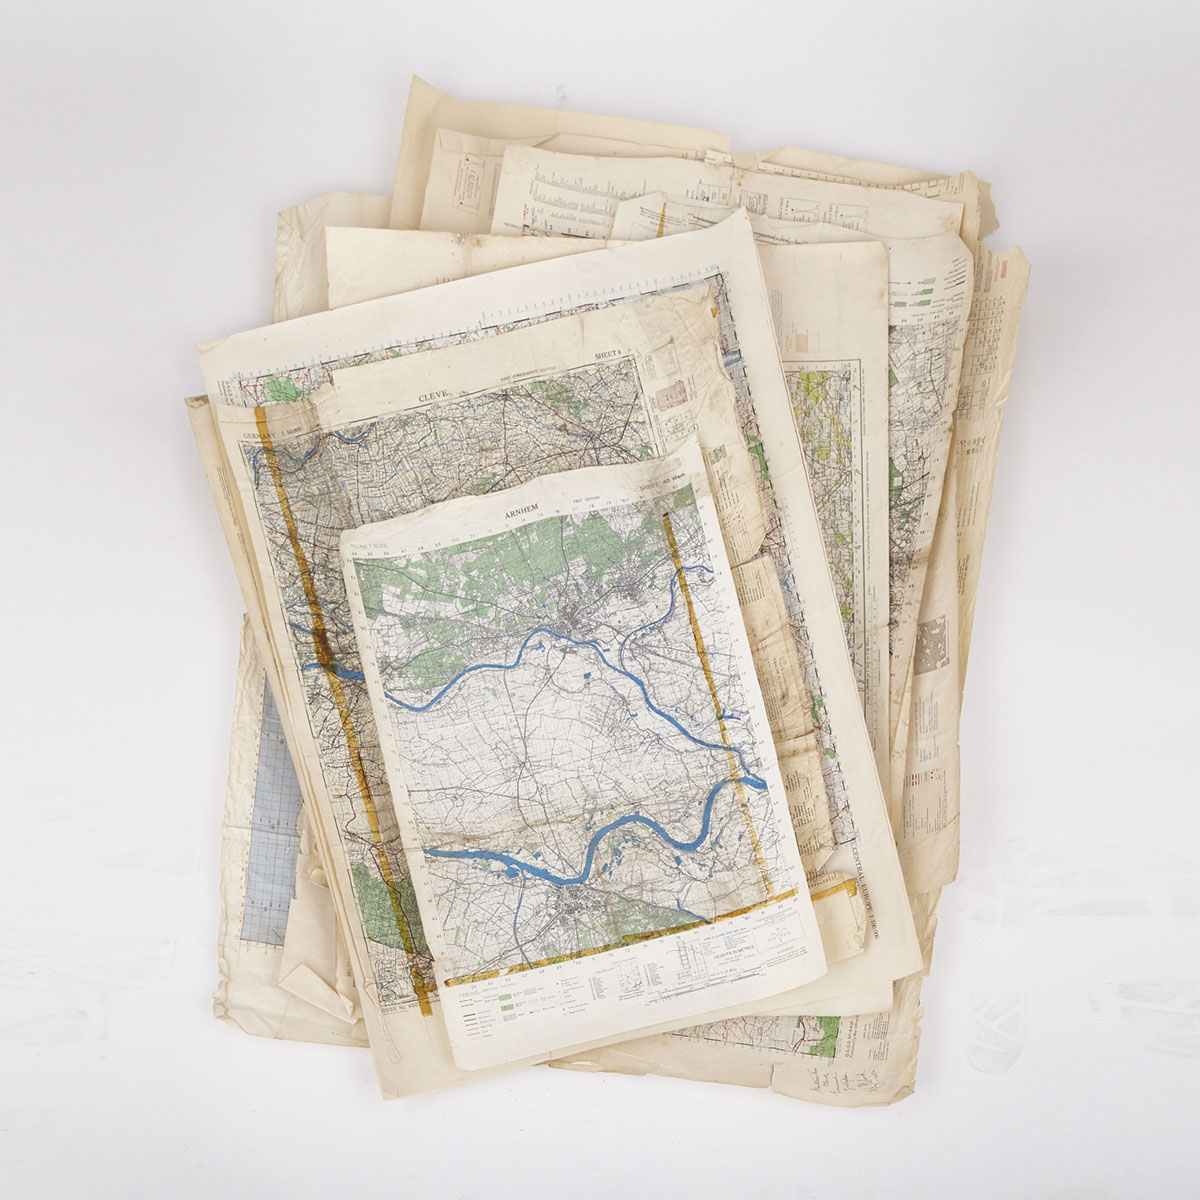 Archive of 20 WWII War Office and Ordnance Survey Charts and Maps Relating to the Invasion of Normandy, 1943/44